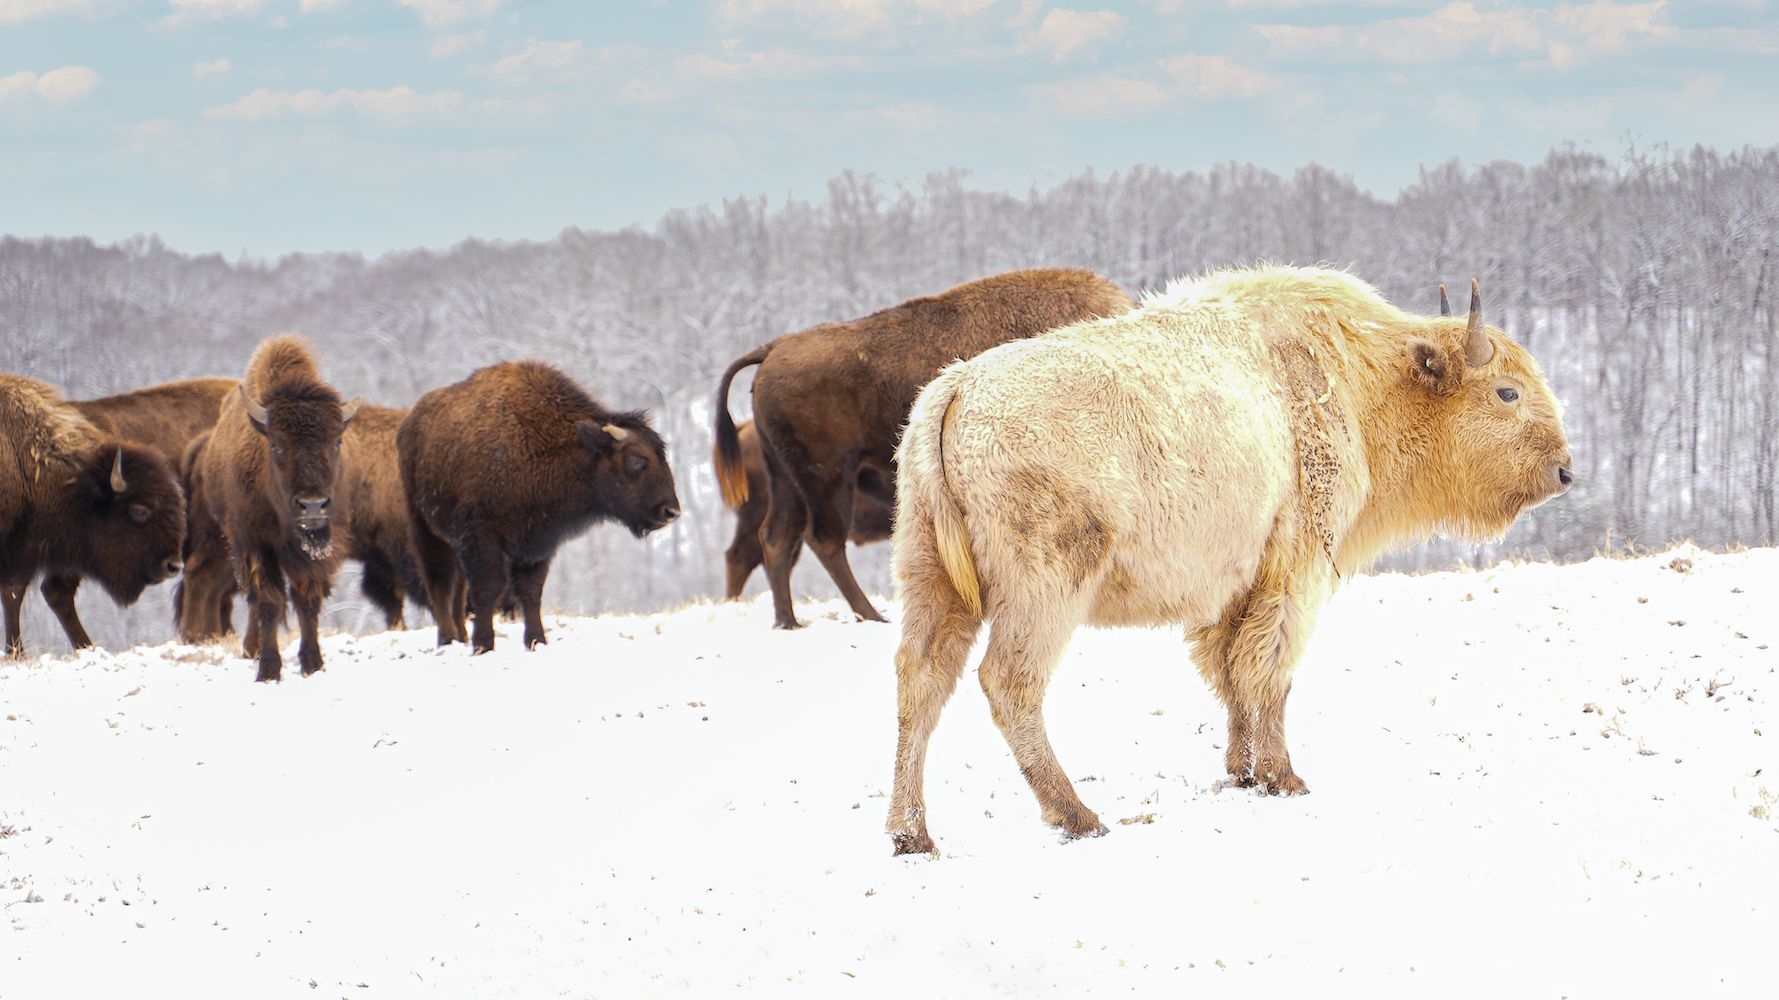 Learn About the Rare White Bison in Dogwood Park